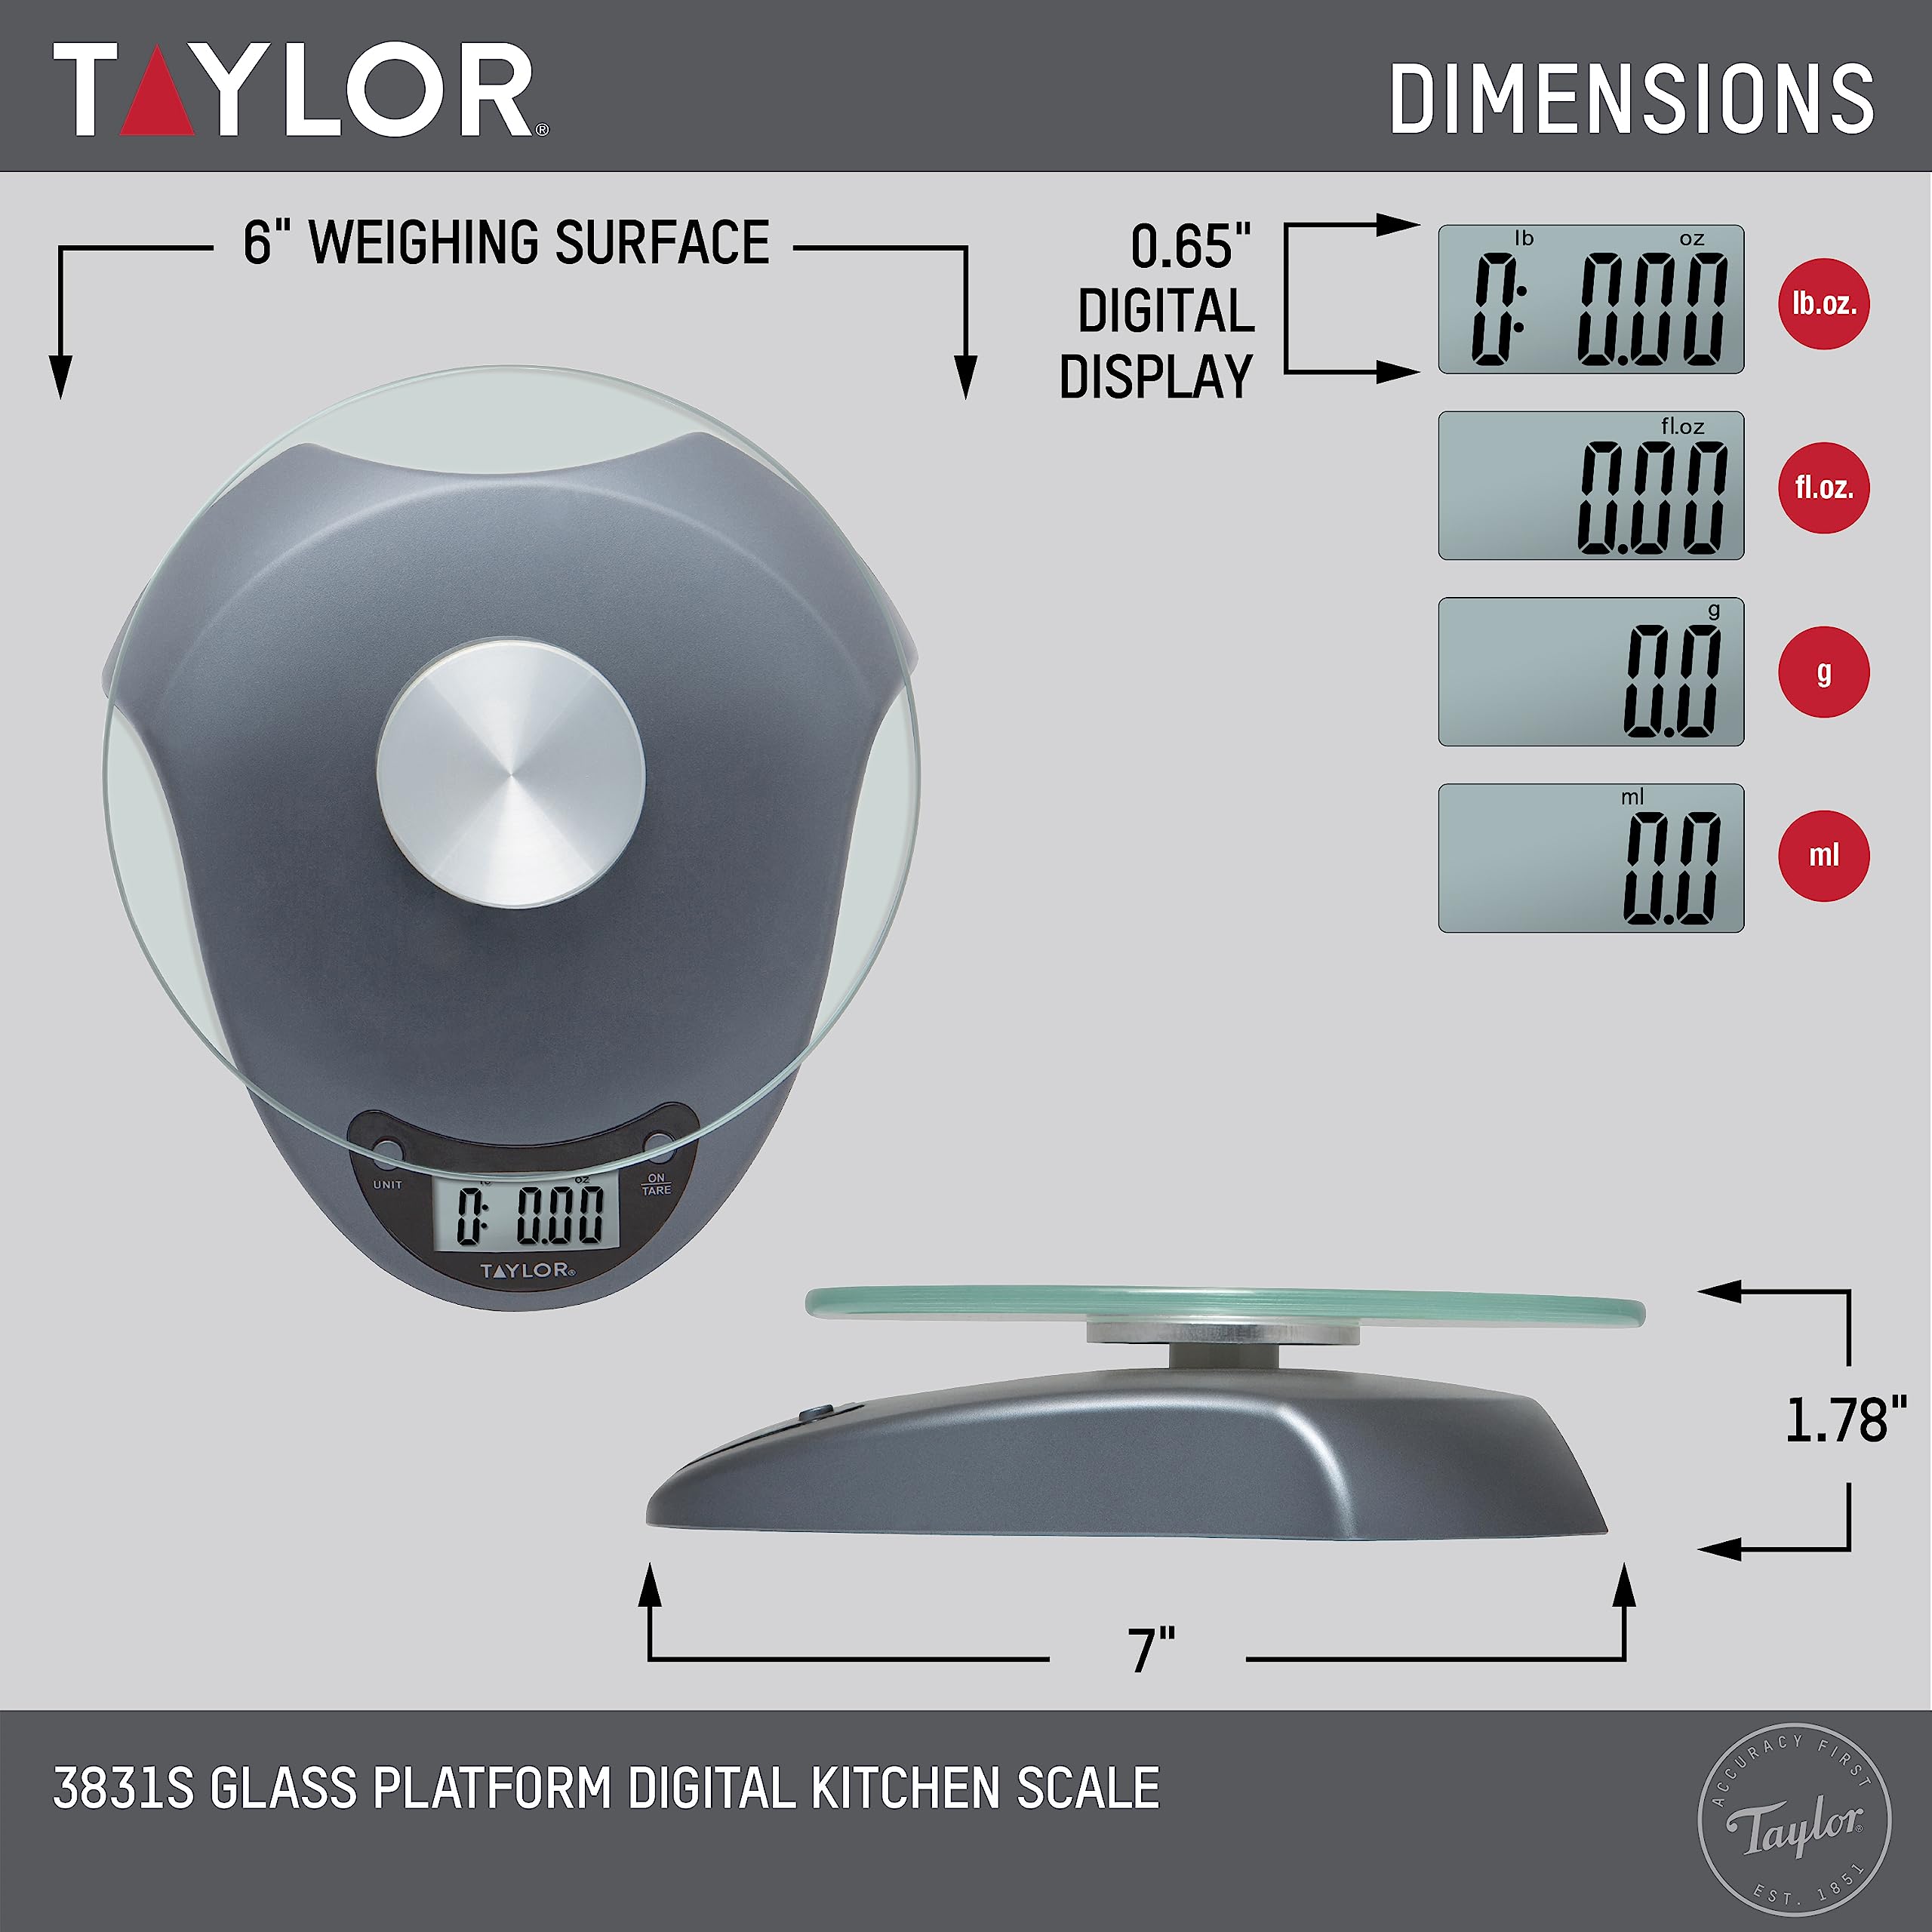 Taylor Digital Kitchen Scale with Glass Platform, Tare Button, and Plastic Body Weighs up to 11 Pounds Capacity, Silver